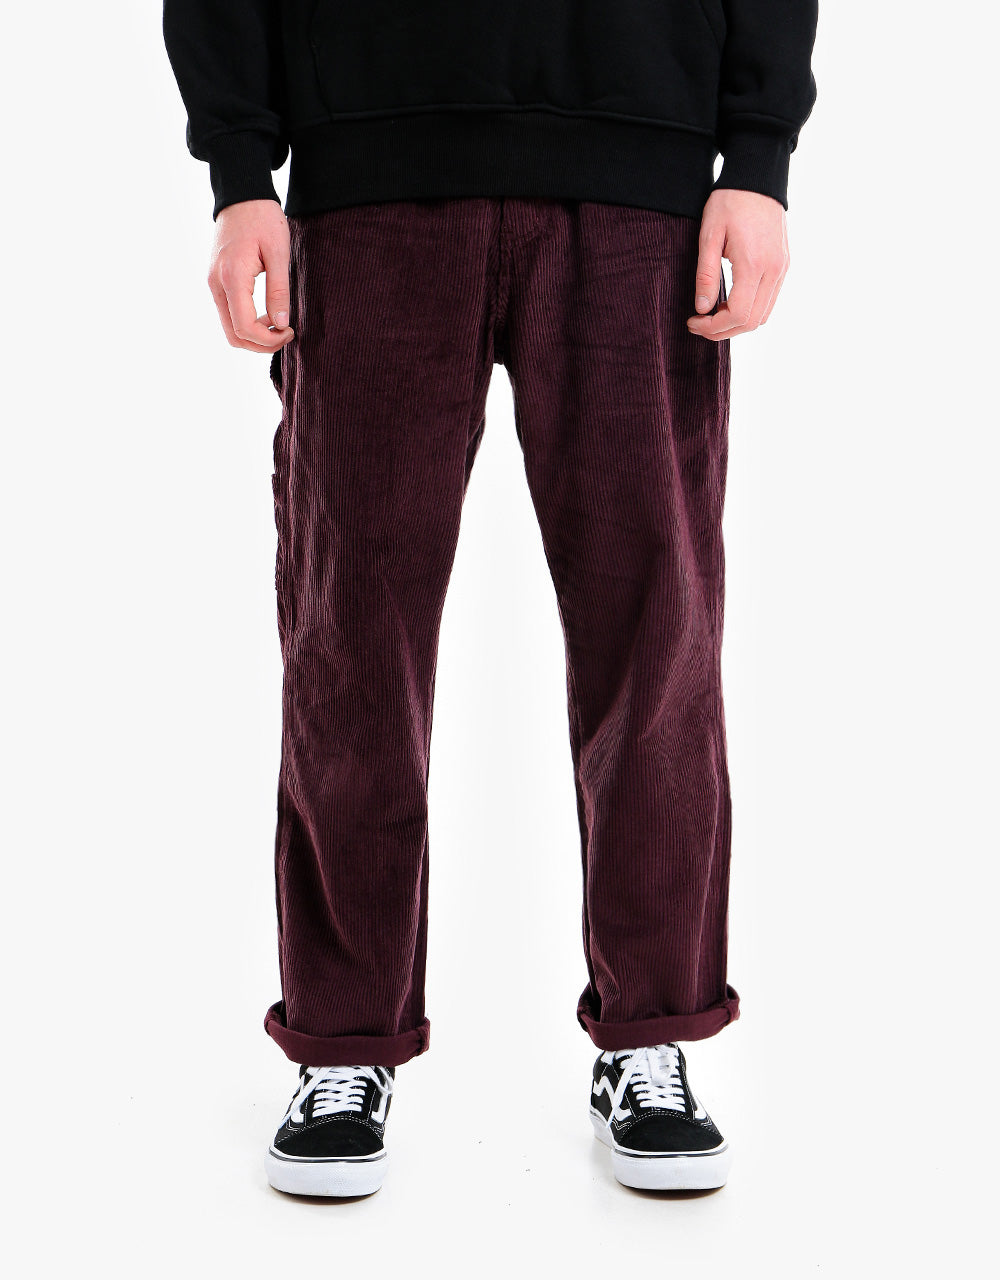 Butter Goods High Wale Cord Baggy Work Pant - Dusty Plum